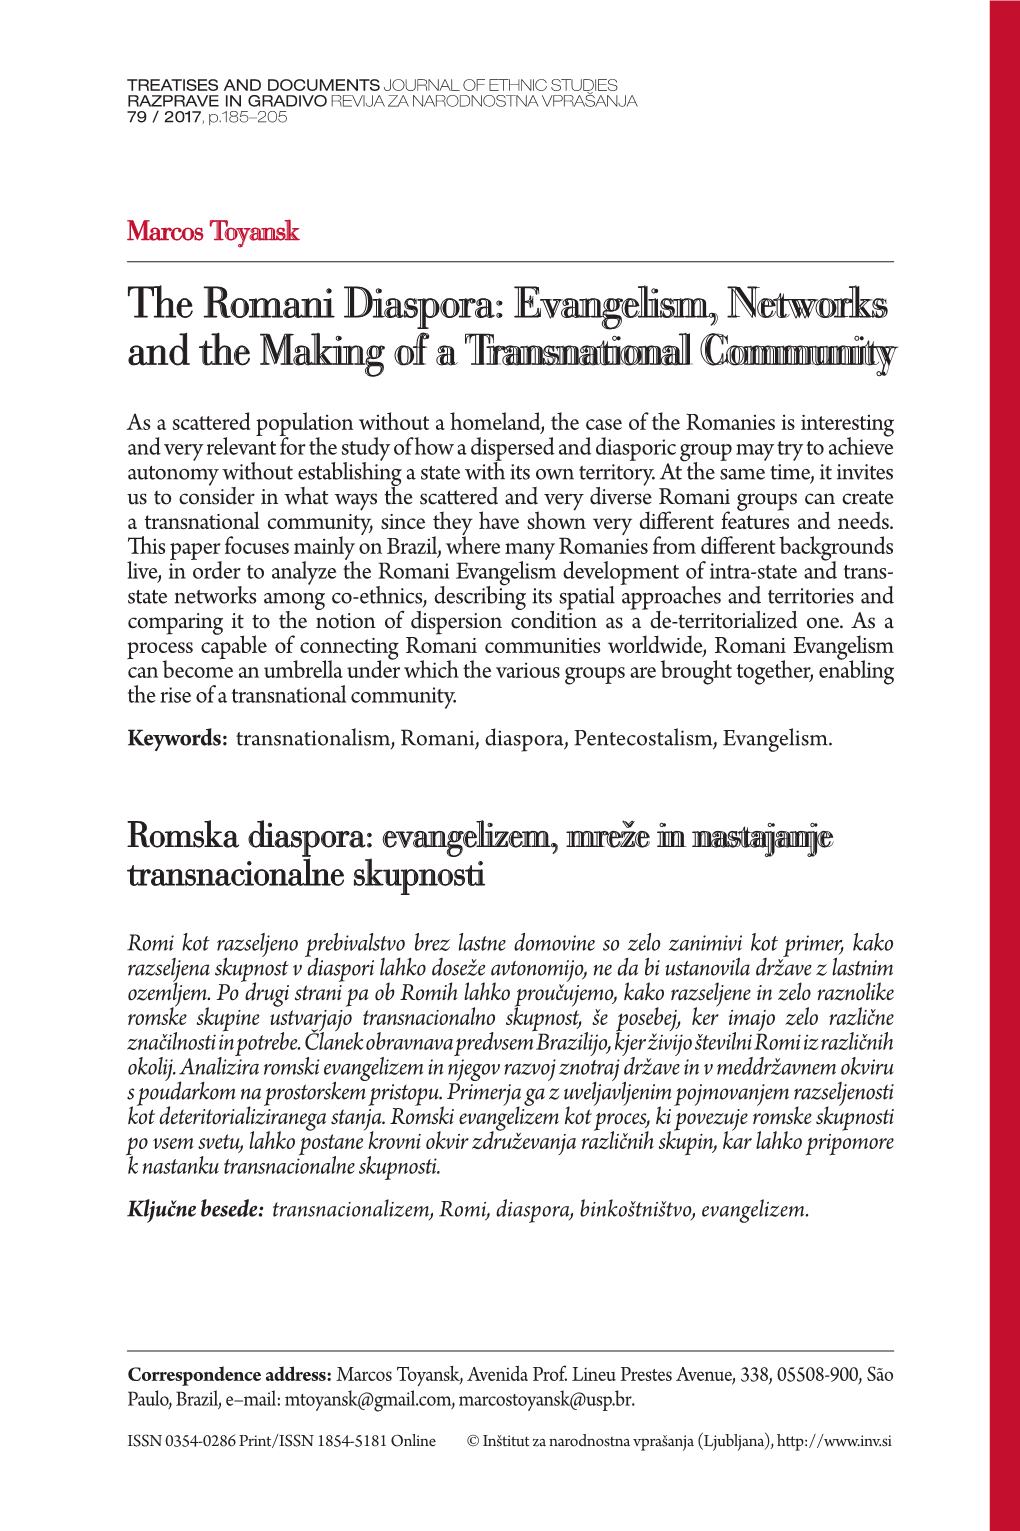 The Romani Diaspora: Evangelism, Networks and the Making of a Transnational Community